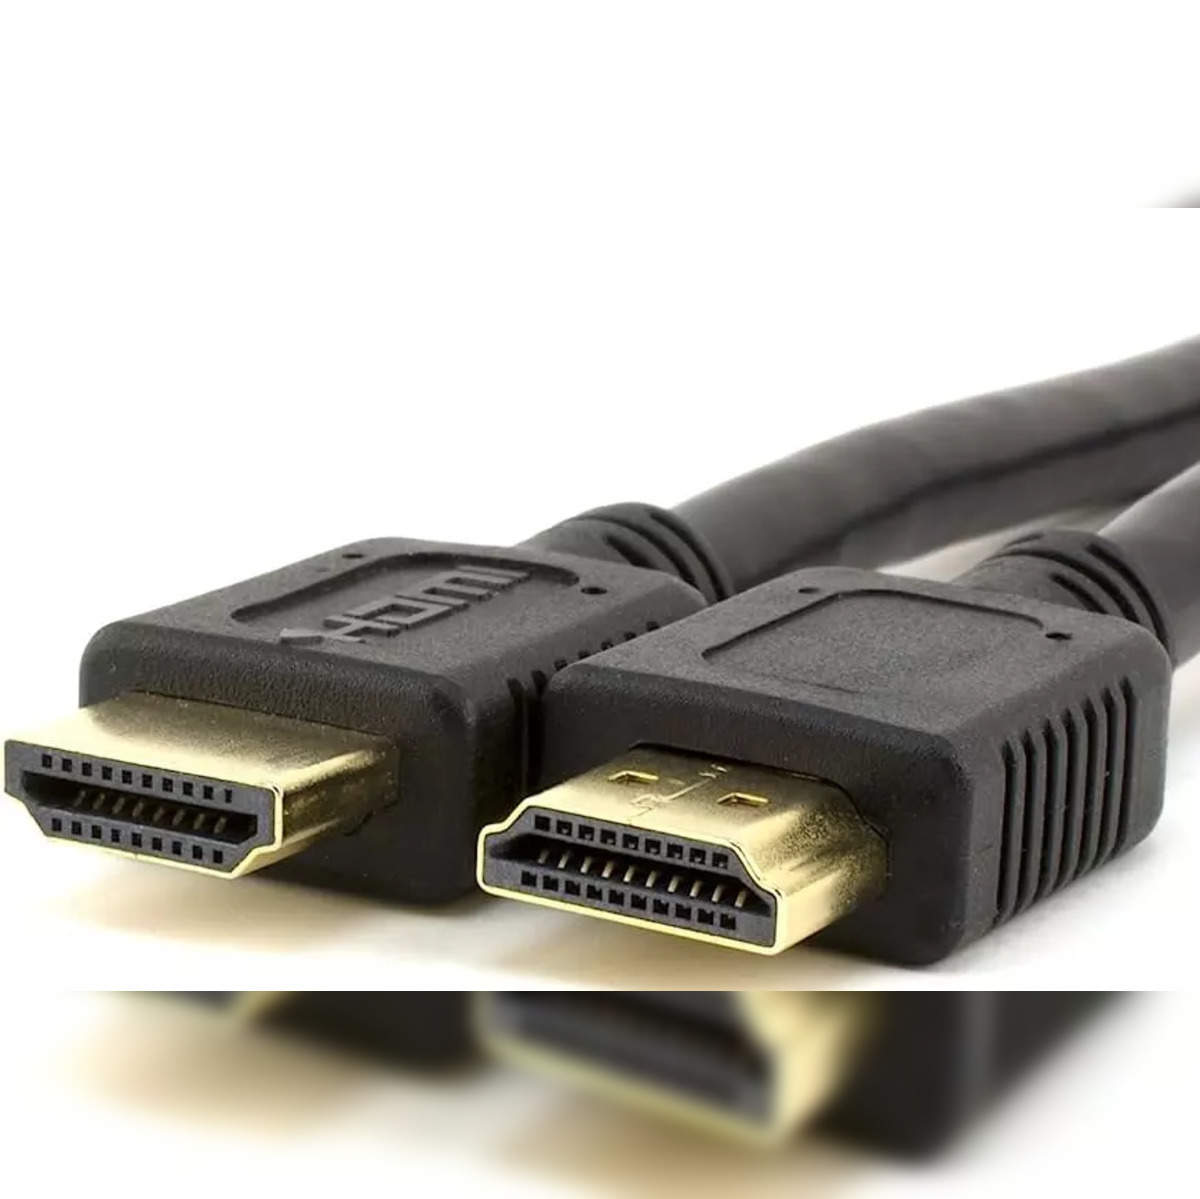 ELG 4K Certified HDMI Cable 60Hz 2.0 18Gbps 10FT/3M, High Speed Cable, 24K  Gold Connectors, ARC, Ethernet, HDR - TV, Laptop, Gaming Monitor